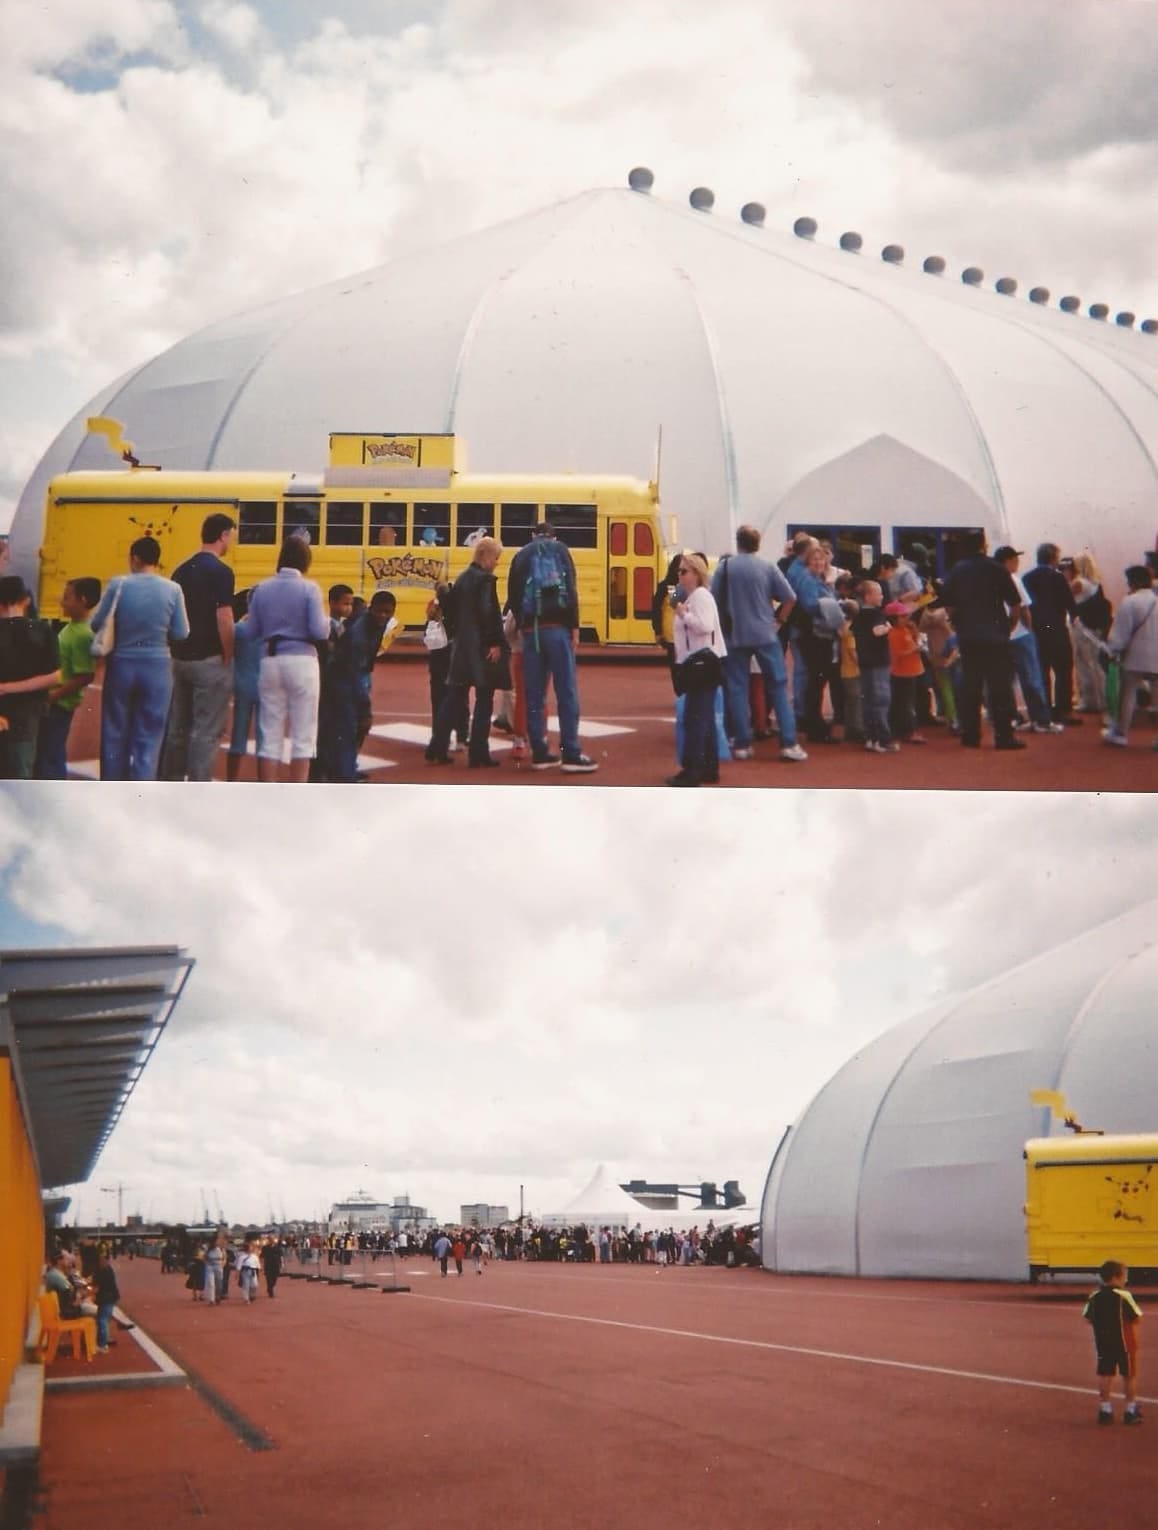 A photograph of the line at the Pokémon event, with the Pikachu bus